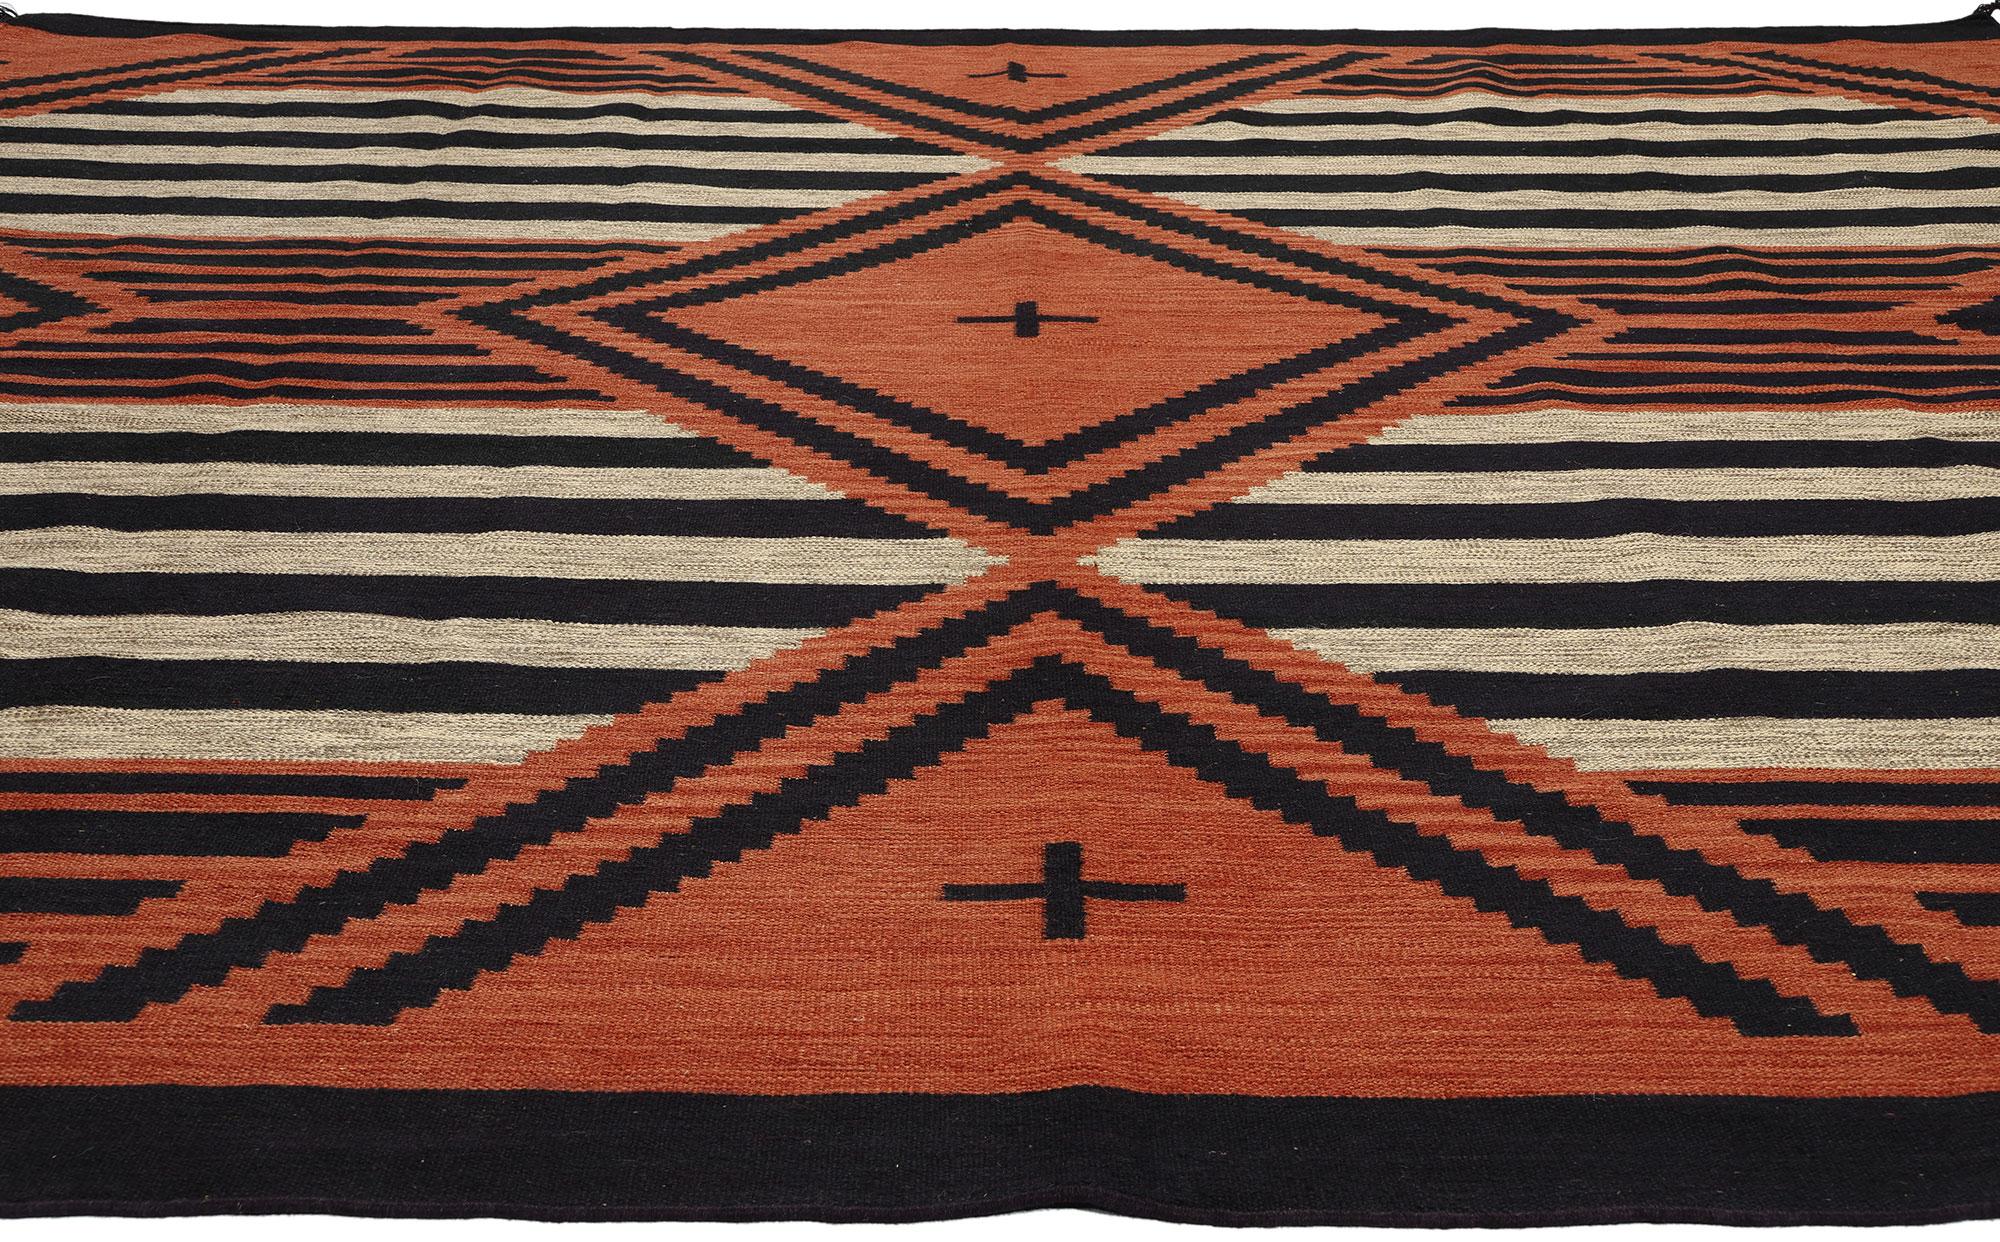 South Asian Contemporary Santa Fe Southwest Modern Chief Blanket Navajo-Style Rug  For Sale